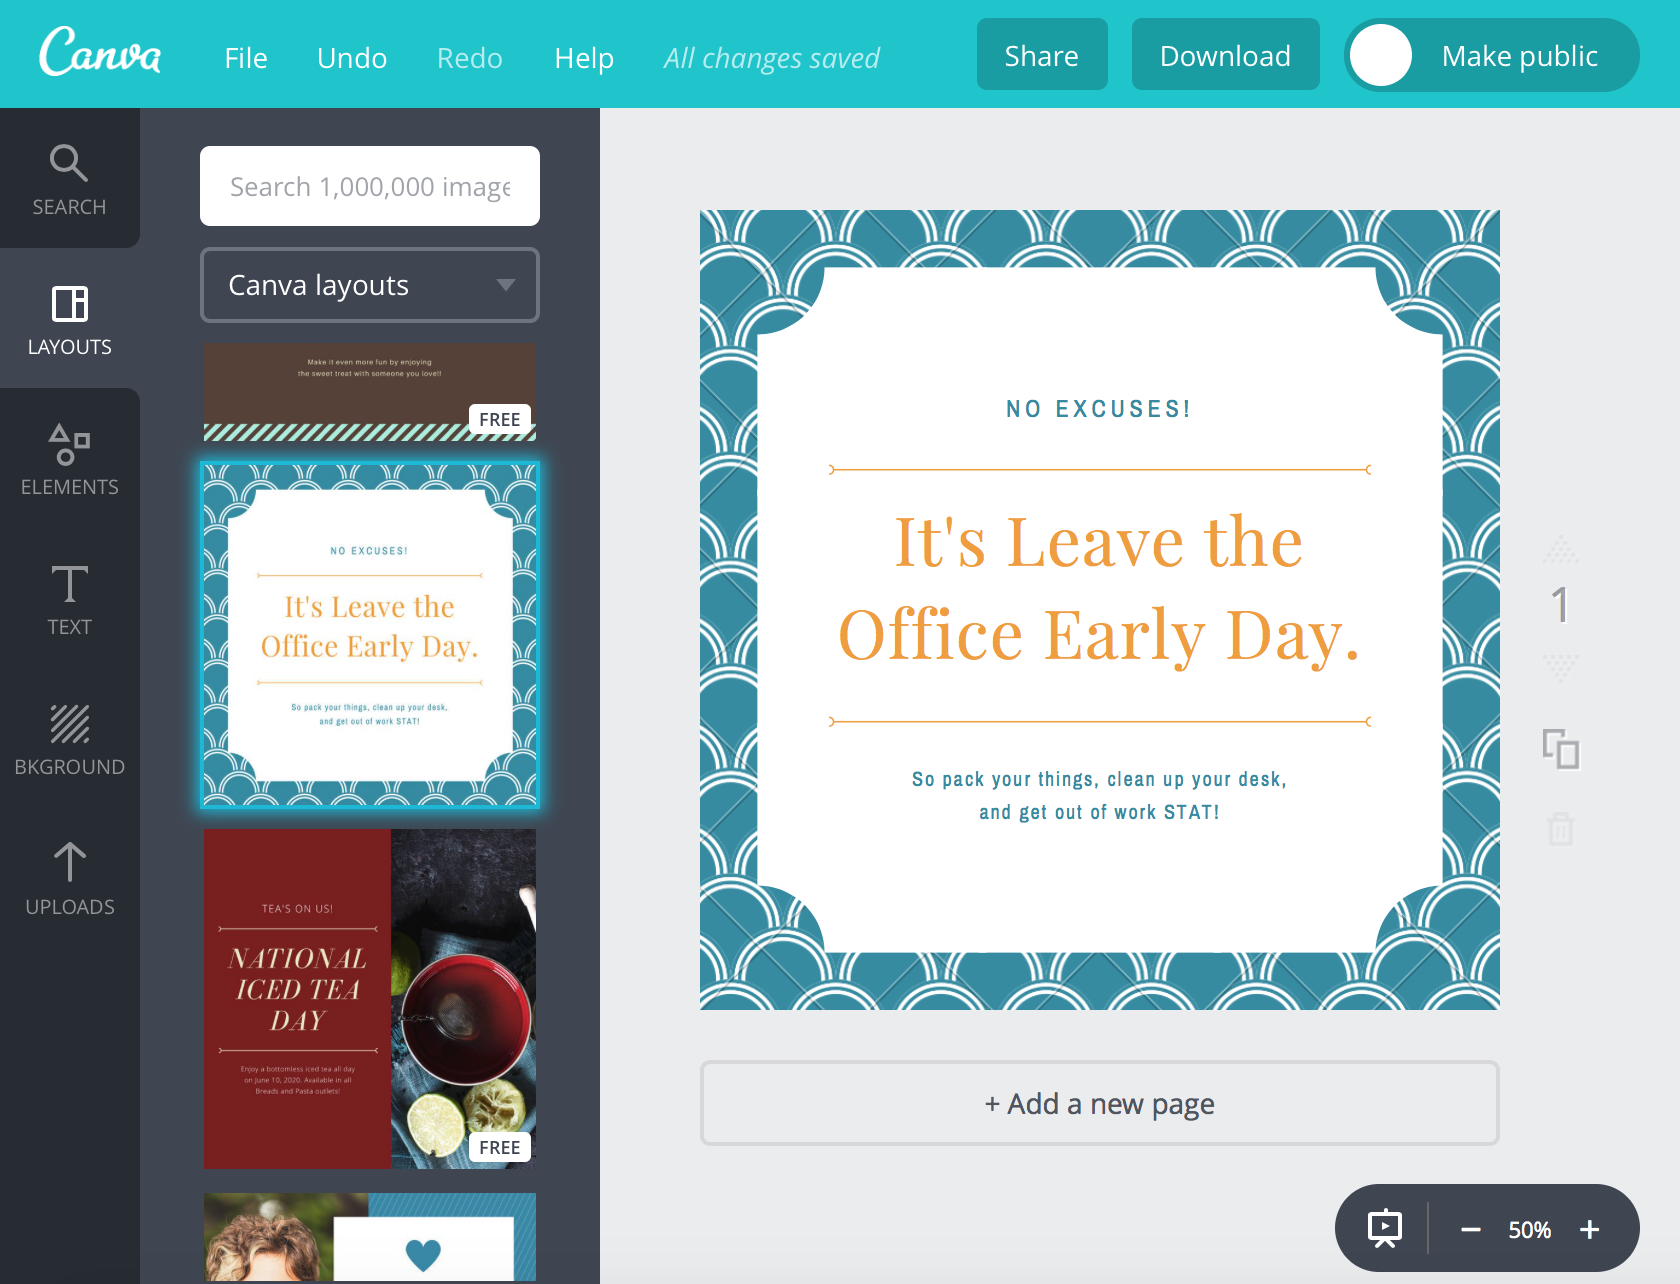 Canva is an easy-to-use graphic design software what is free to use online.